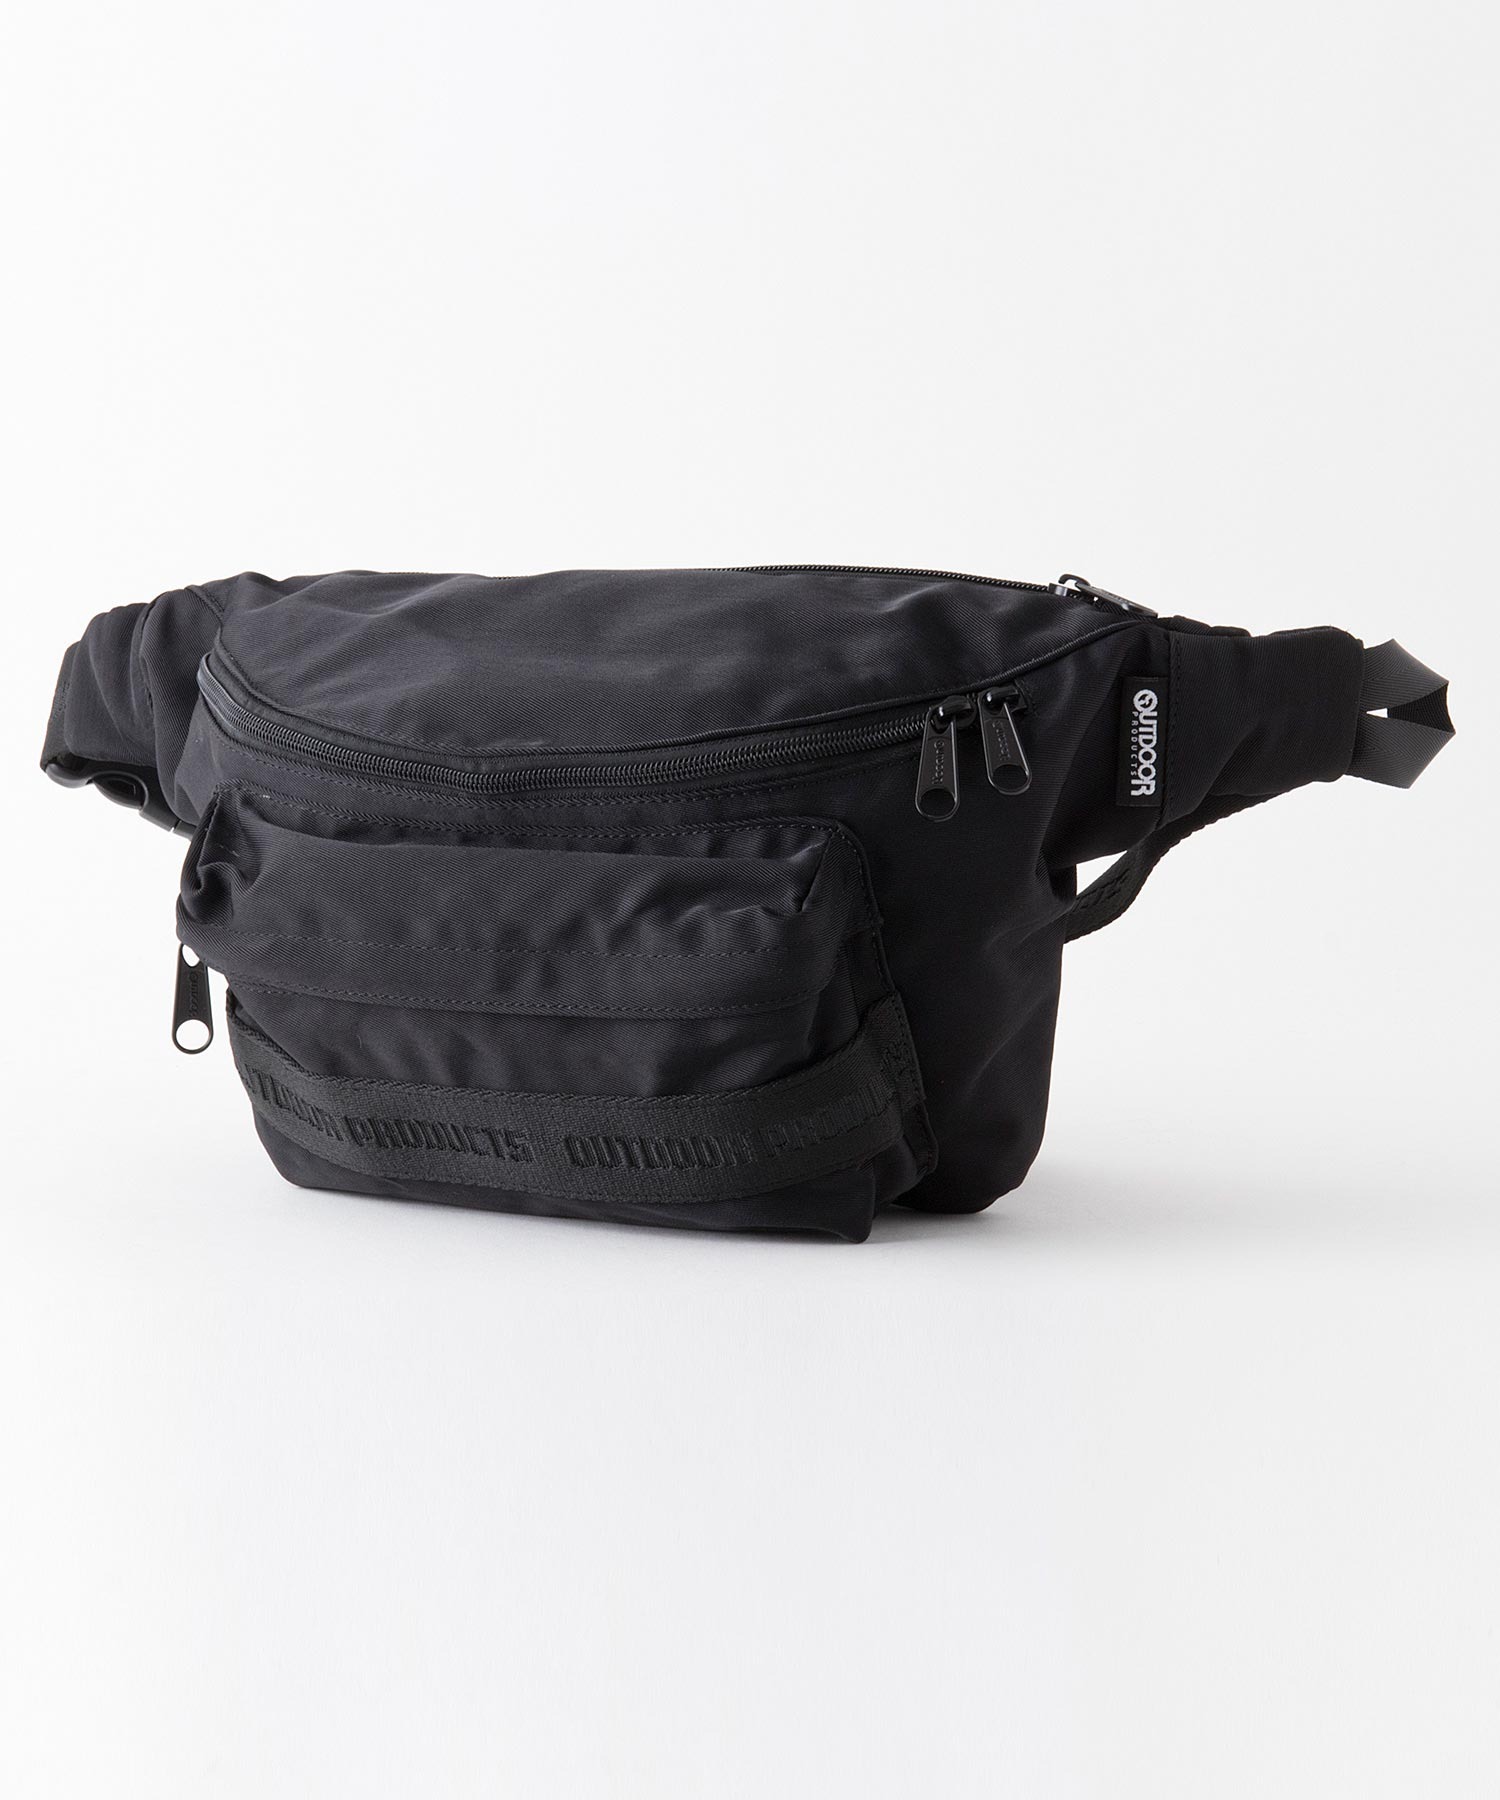 Hillsdale Waistbag ウエストポーチ ウエストバッグ ブランドロゴ Outdoor Products アウトドアプロダクツ Outdoor Products 公式通販サイト